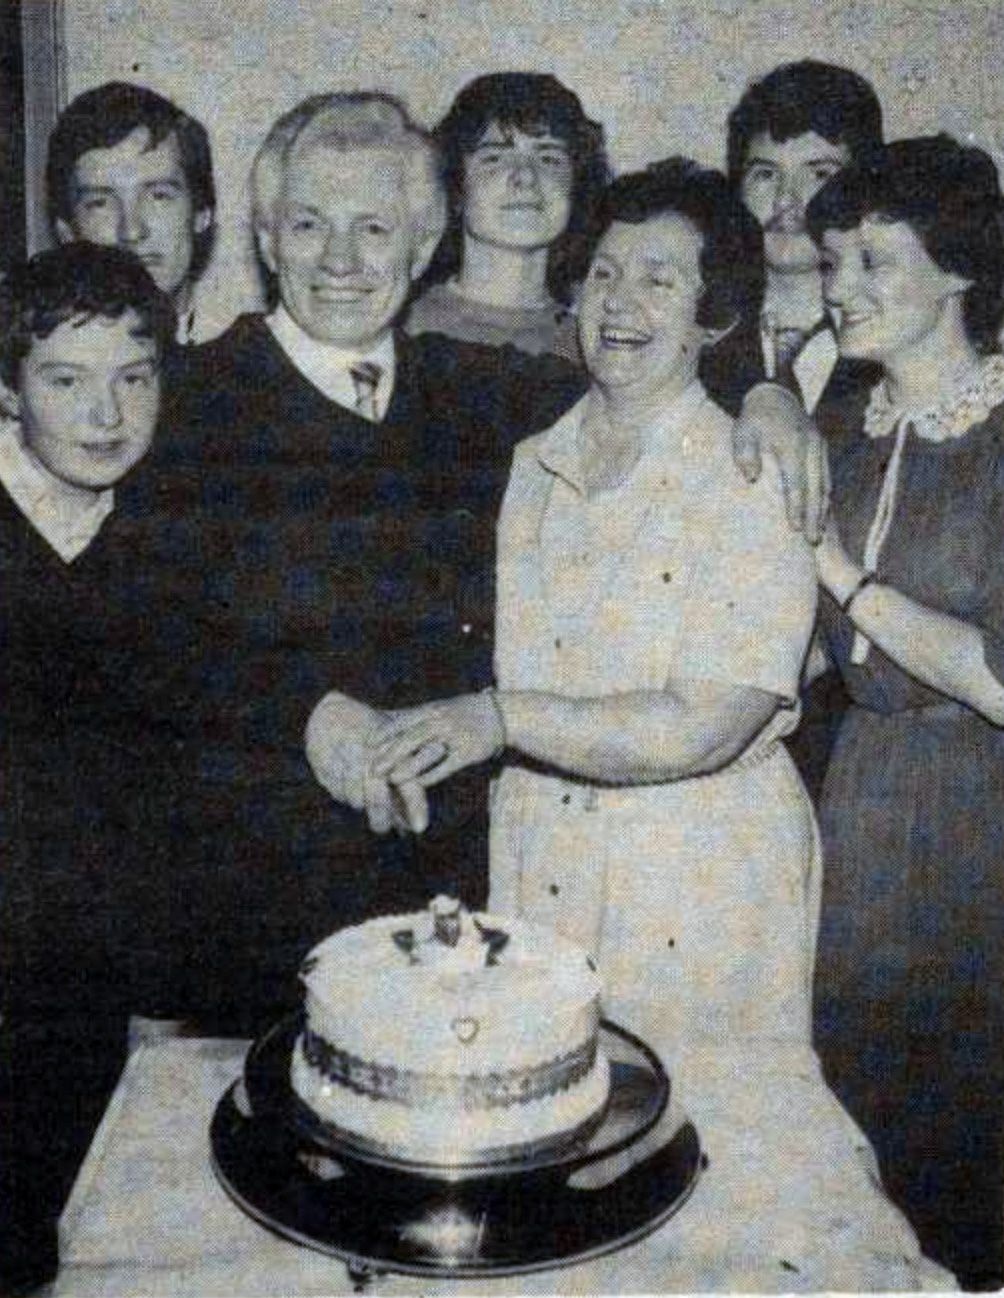 Jackie and Marie Rice celebrated their Silver Wedding anniversary with a function in the Ballymac in April 1983. Joing them were their children Paul, Alan, Noel, Jacqueline and Brendan. They were married in St Malachy’s in April 1958